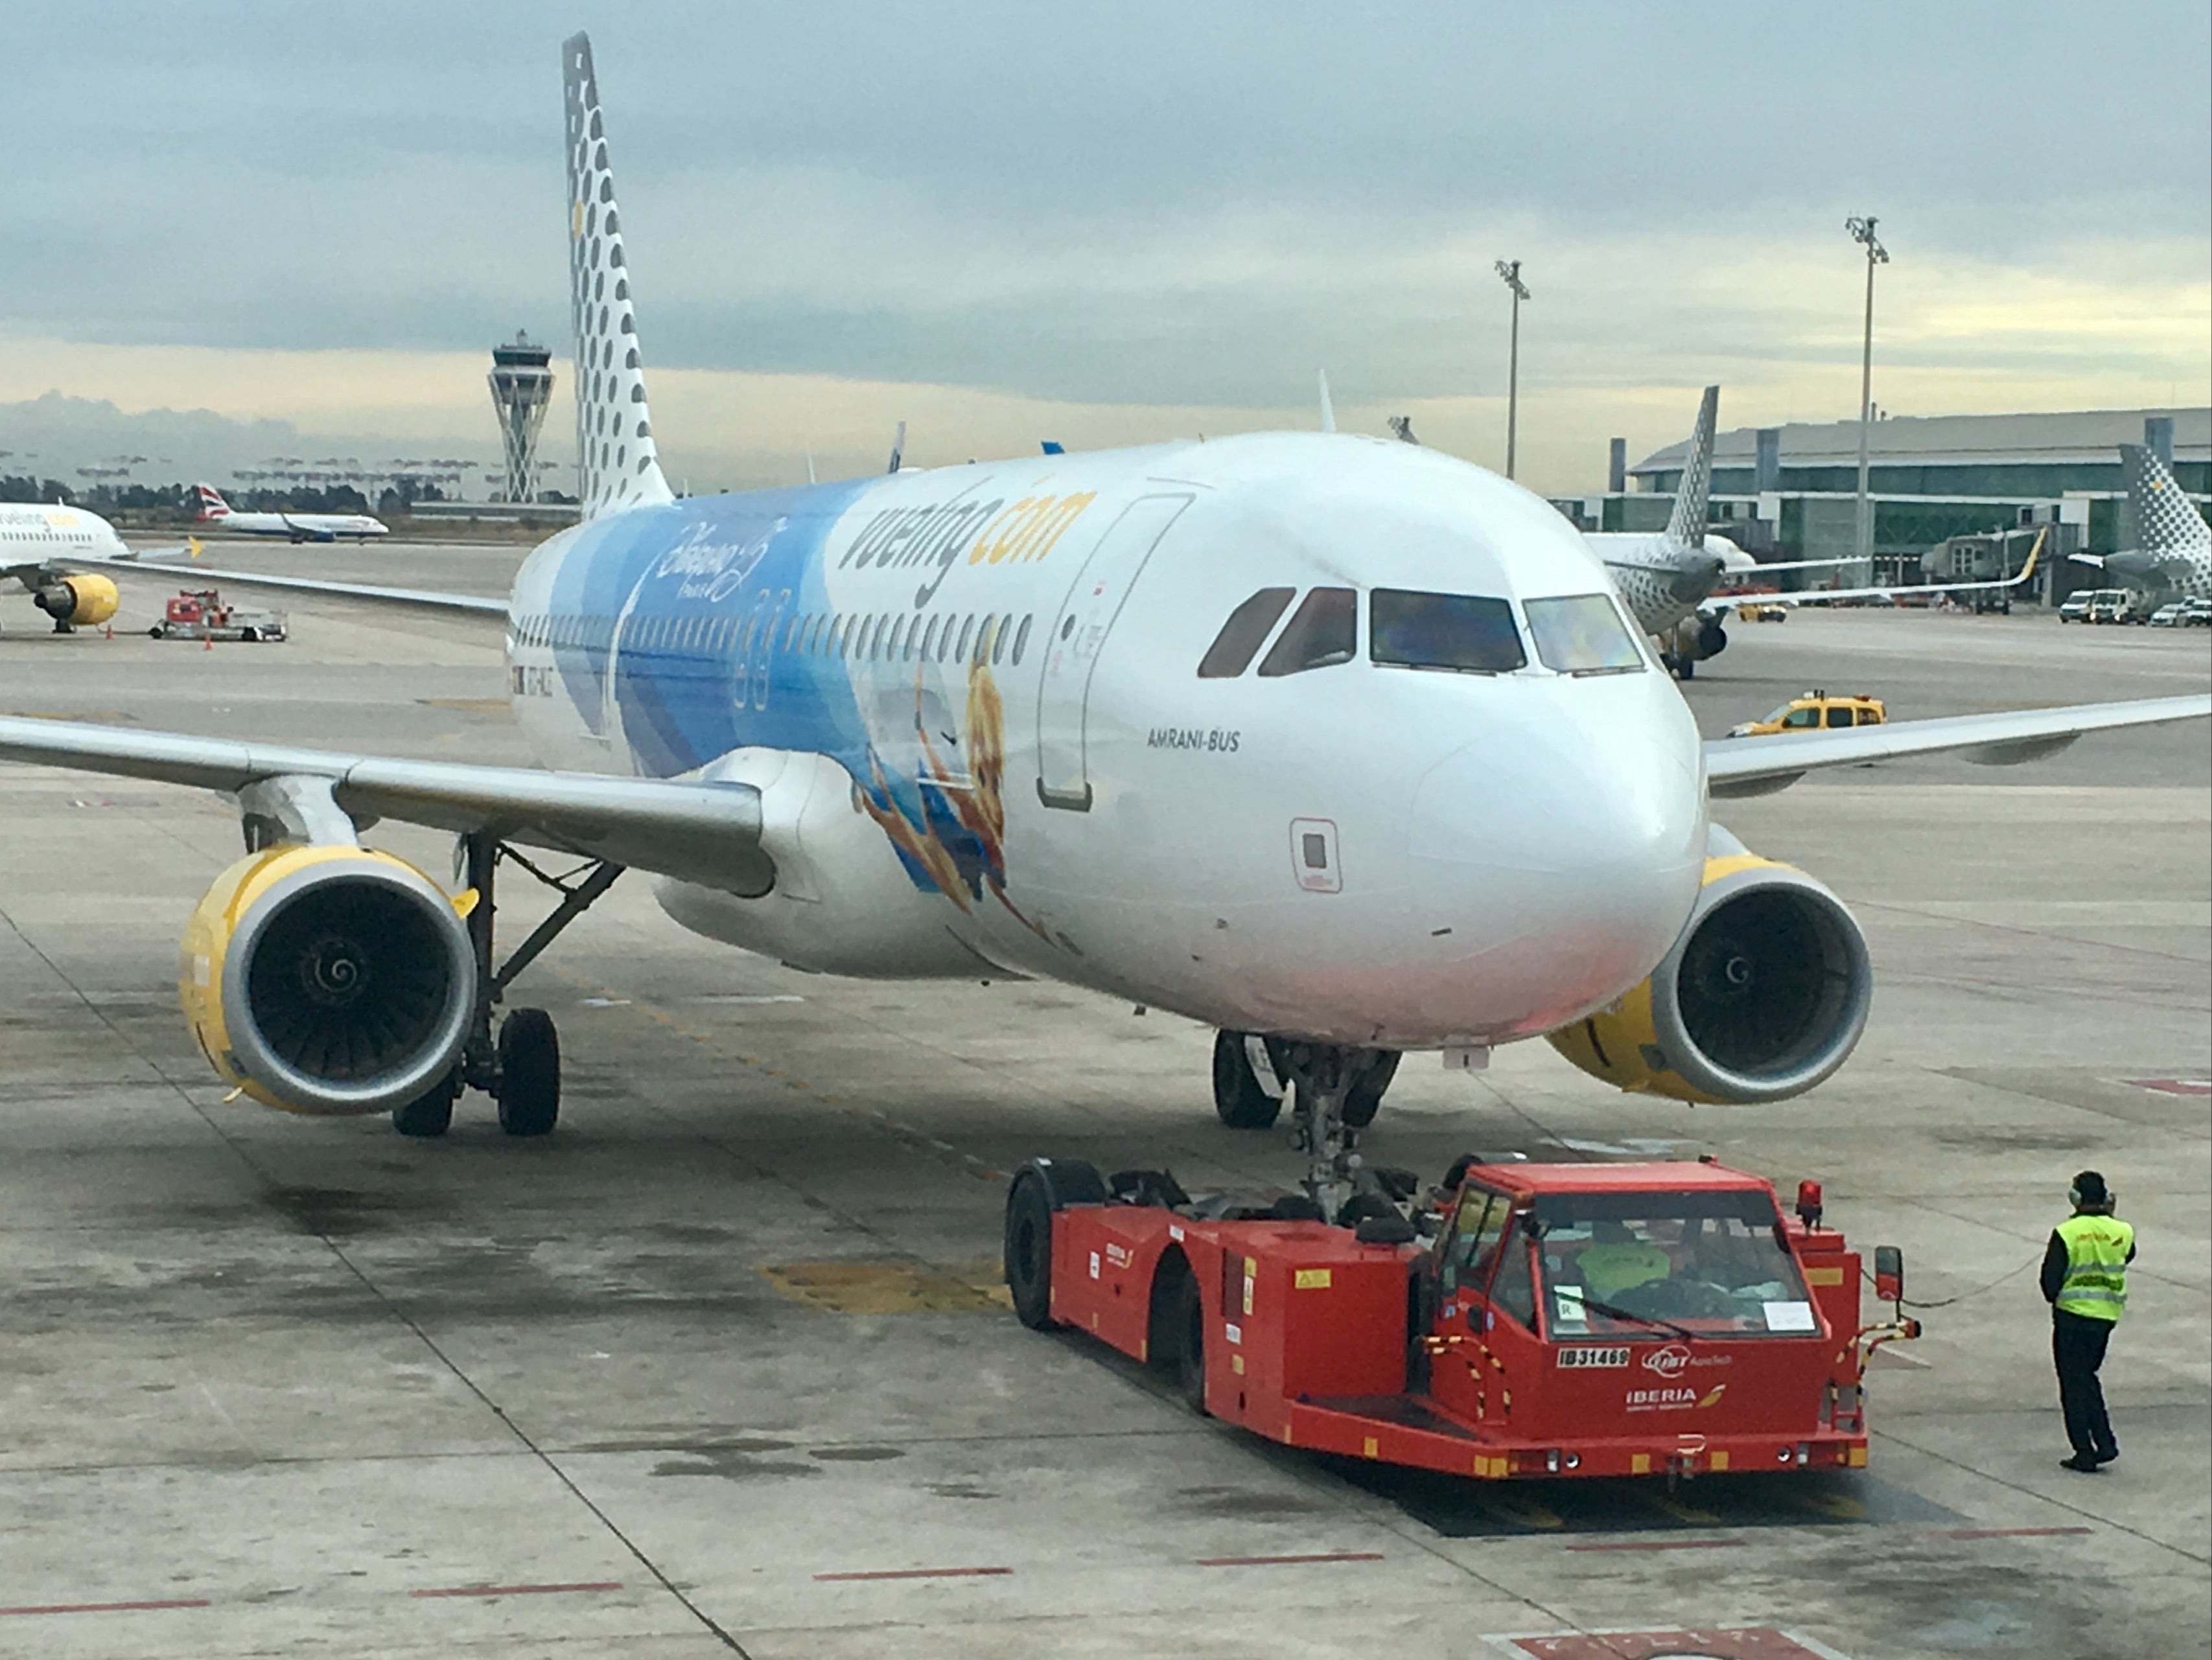 Full service: Vueling Airbus A320 at the airline’s main base in Barcelona